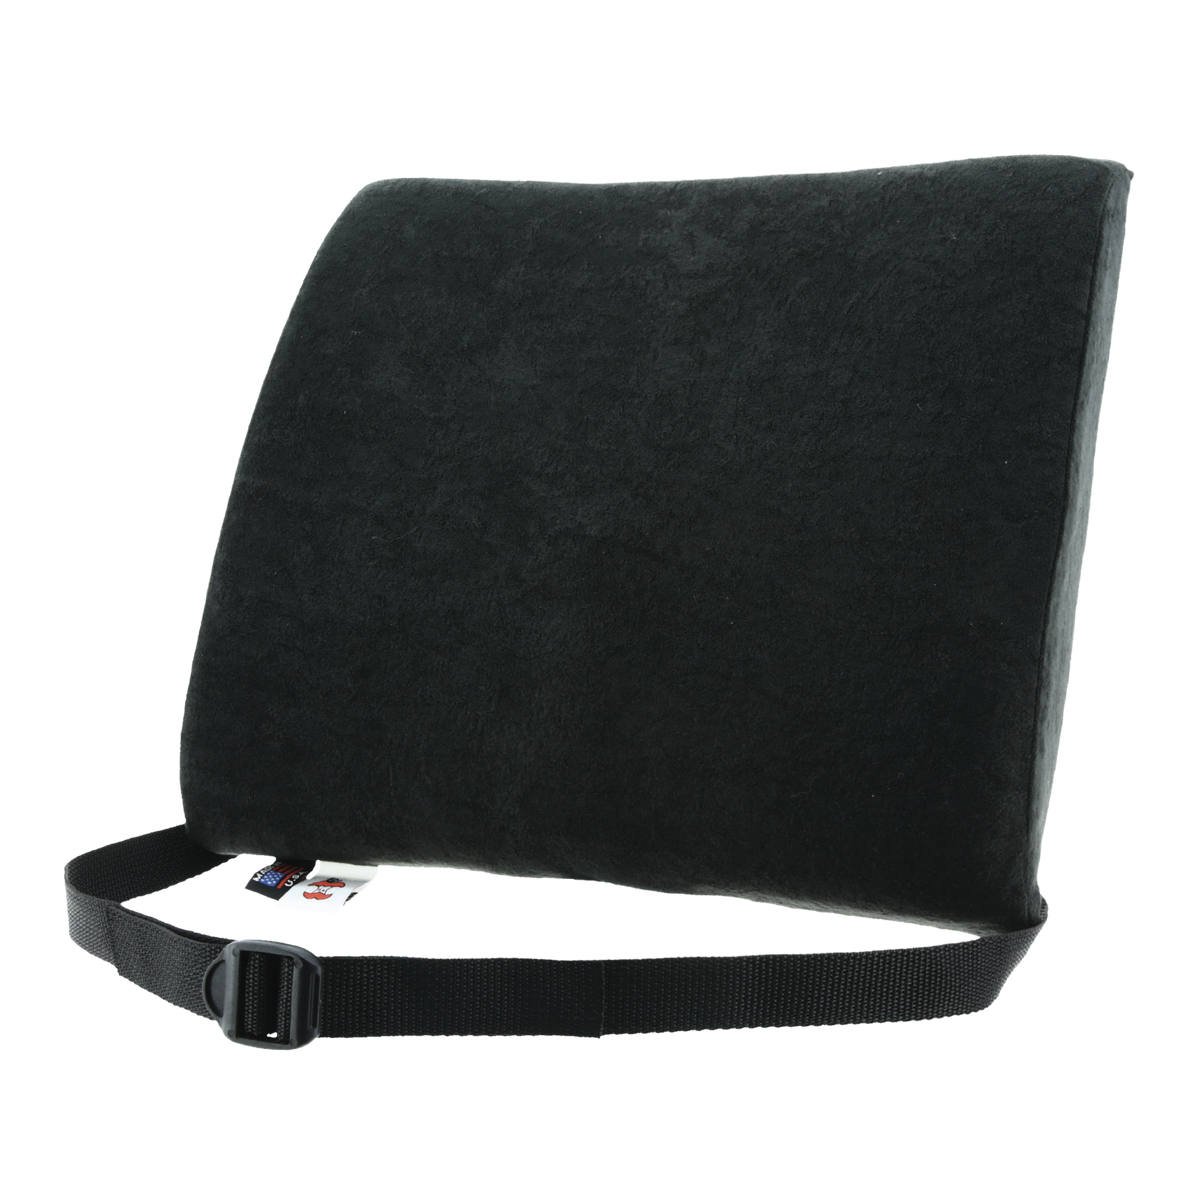 Slimrest Deluxe Lumbar Support  Help Protect & Maintain Proper Spinal